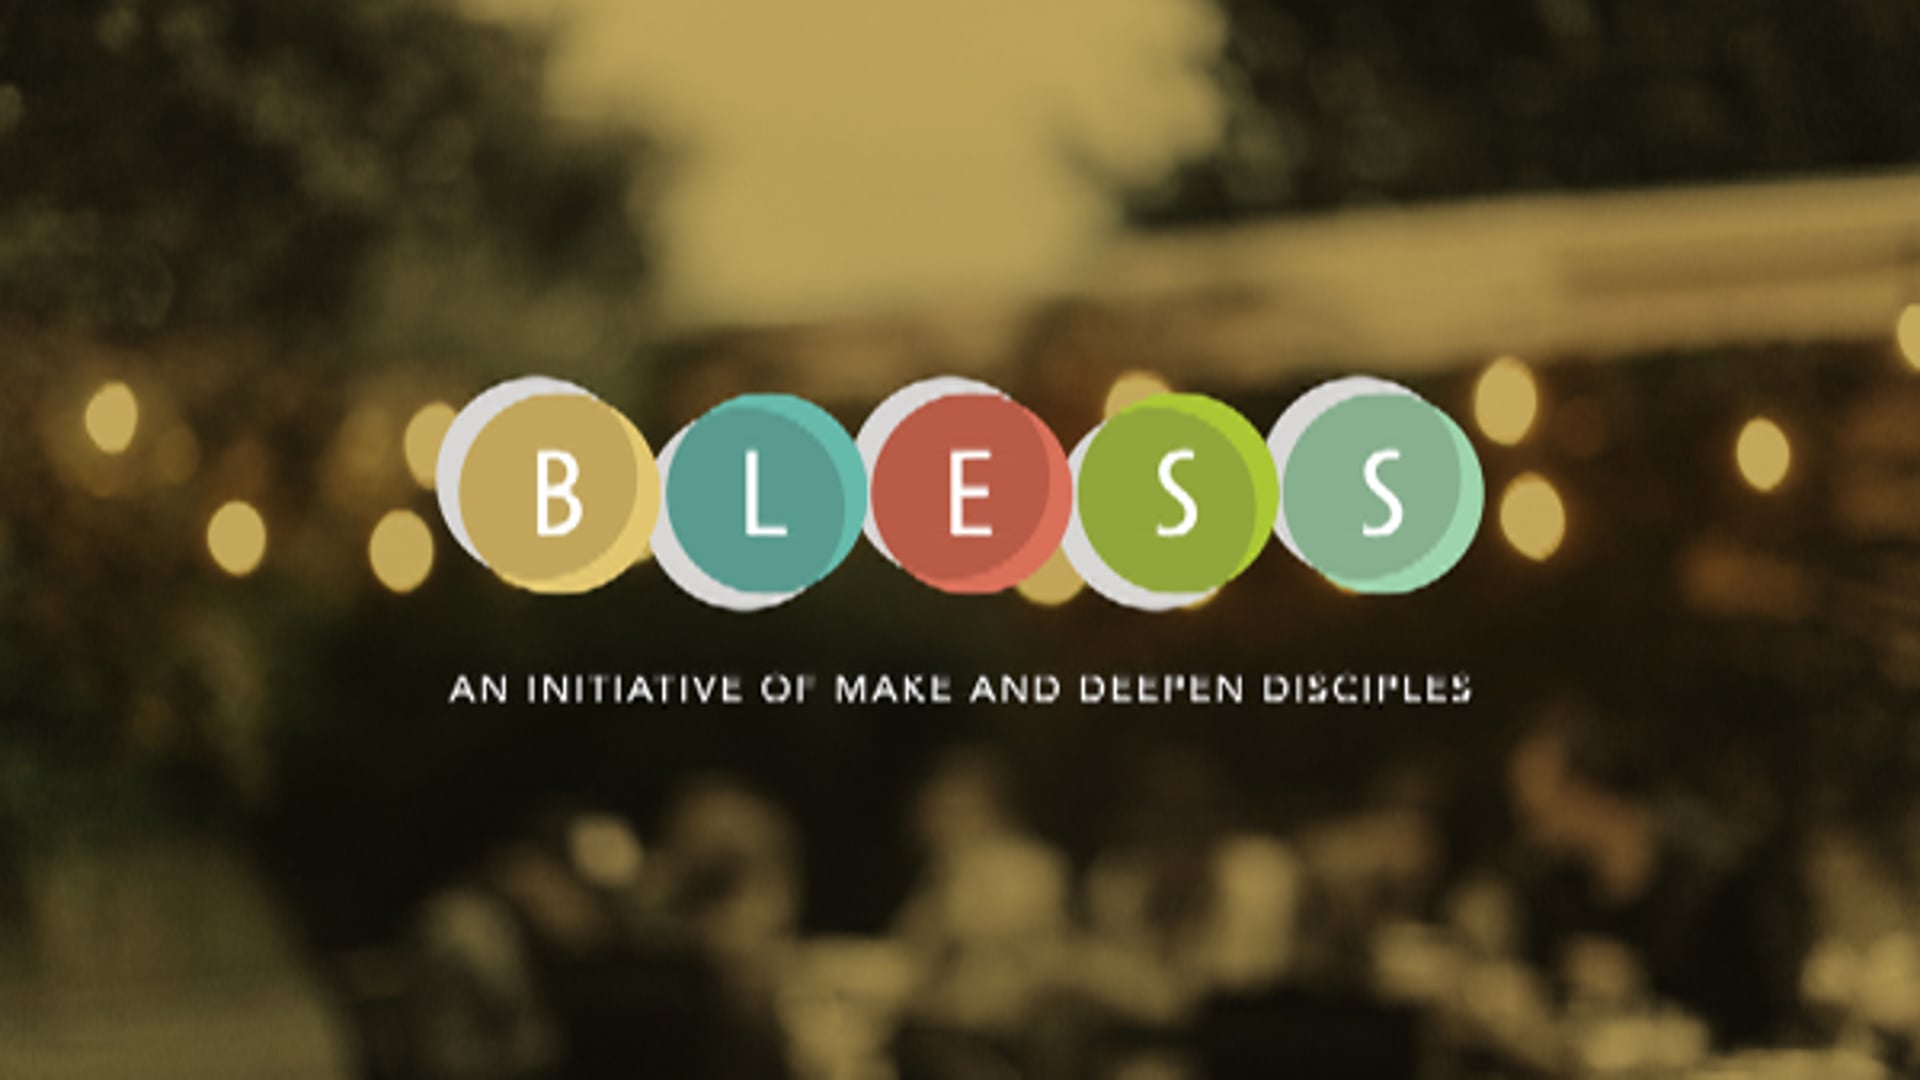 BLESS: Listen With Care | March 13, 2022